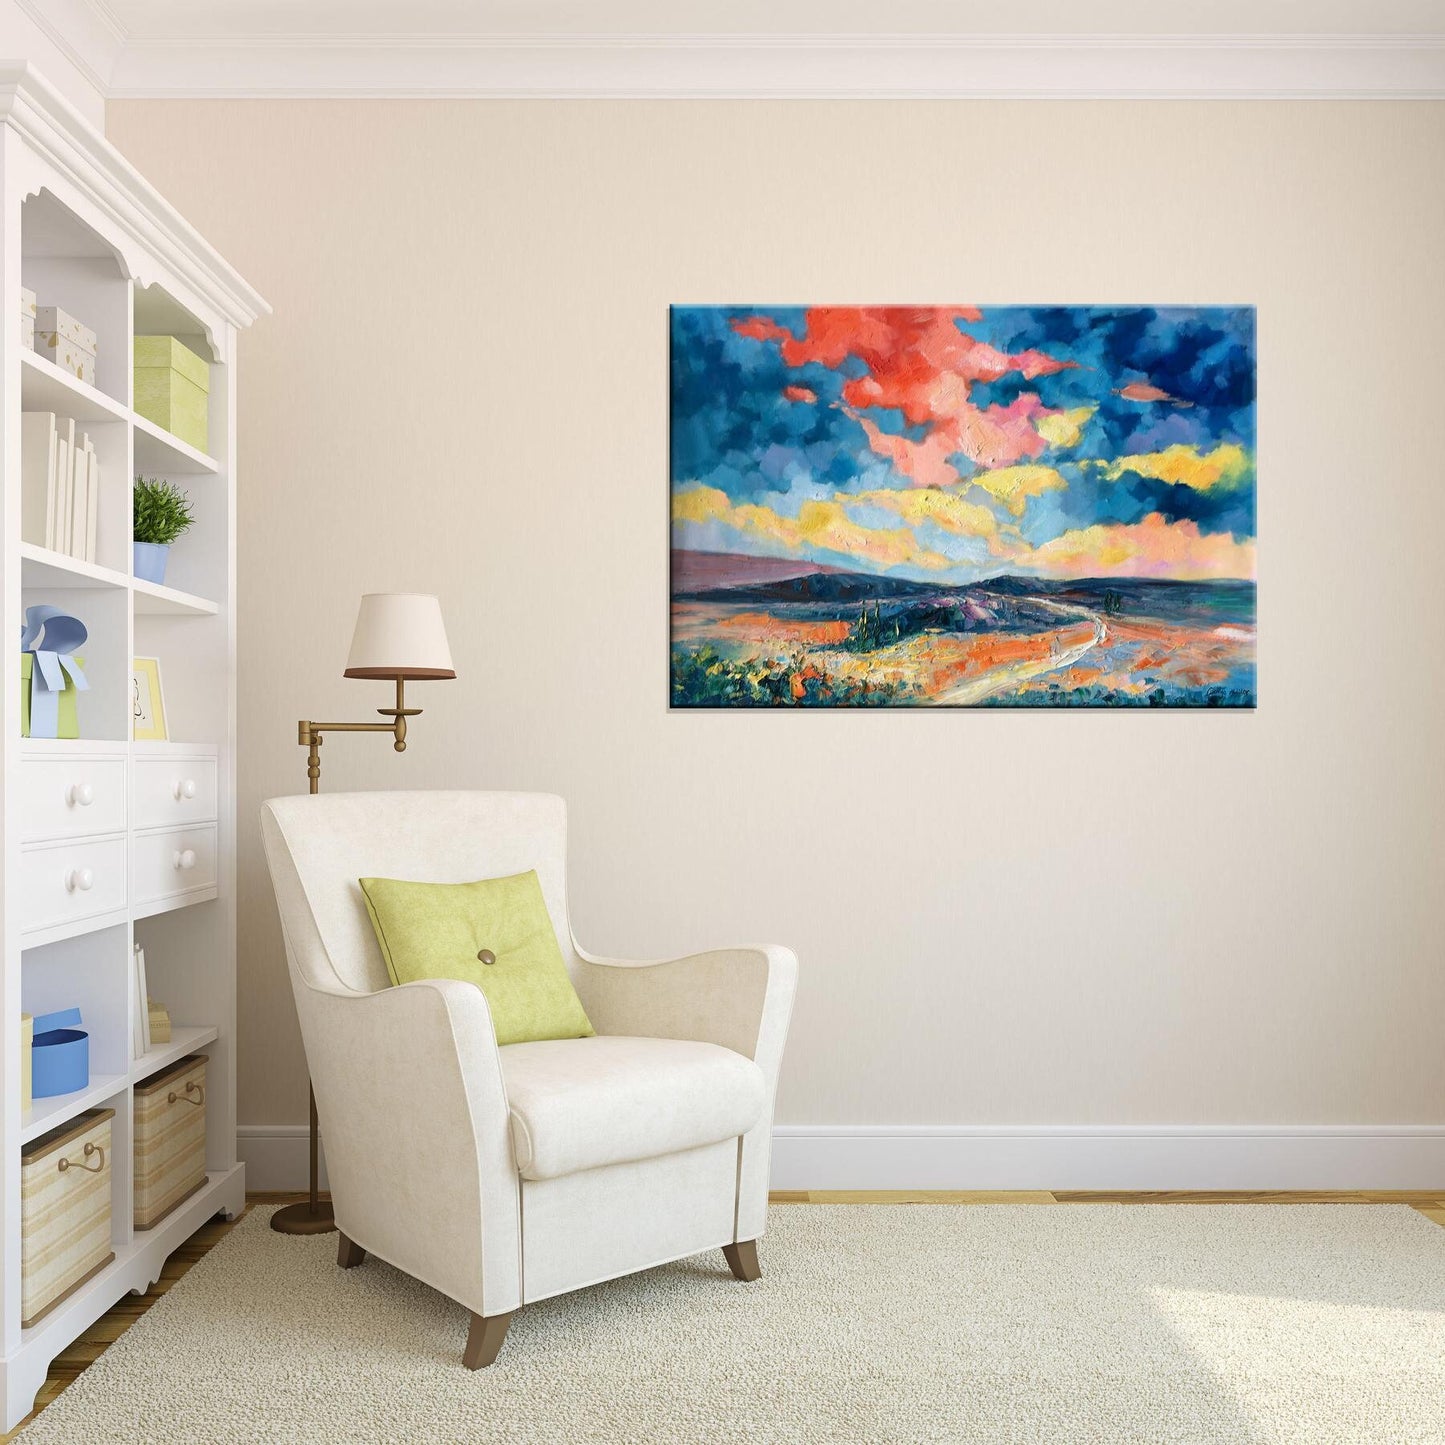 Make Your Wall Pop with Extra Large Abstract Paintings on Canvas - Ready to Ship Today - Original Art